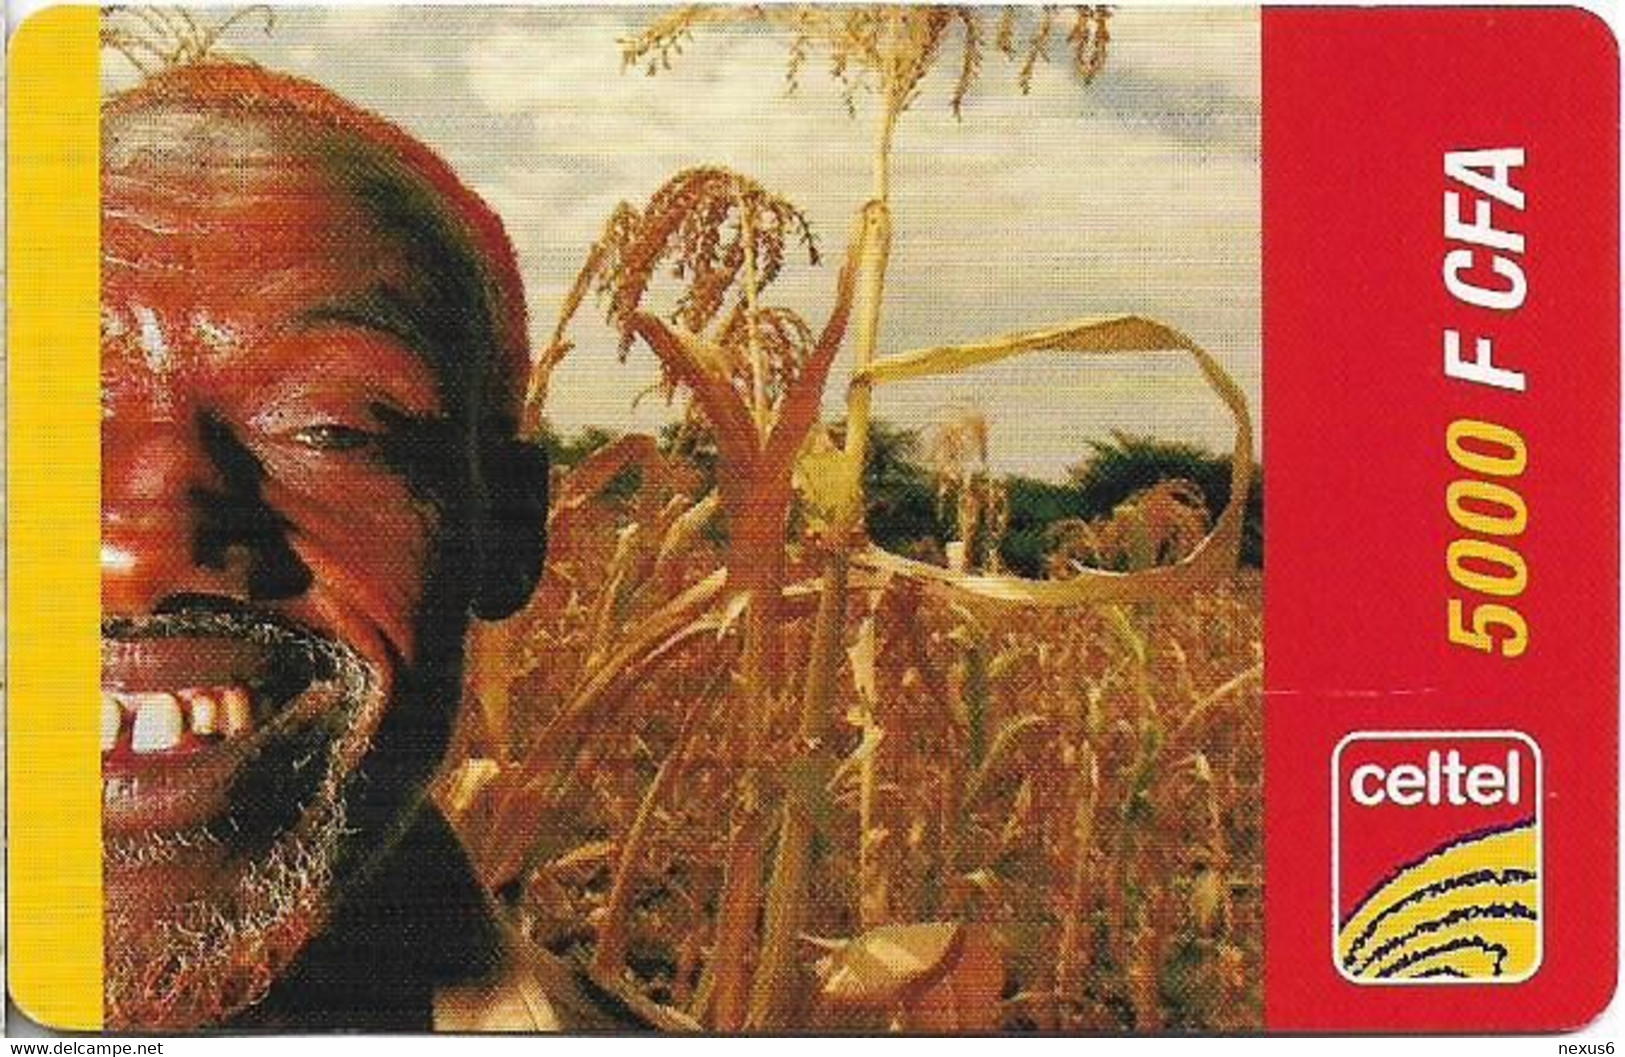 Chad - Celtel - Old Man In A Plantation - Exp.31.12.2006, GSM Refill 5.000FCFA, Used - Tschad